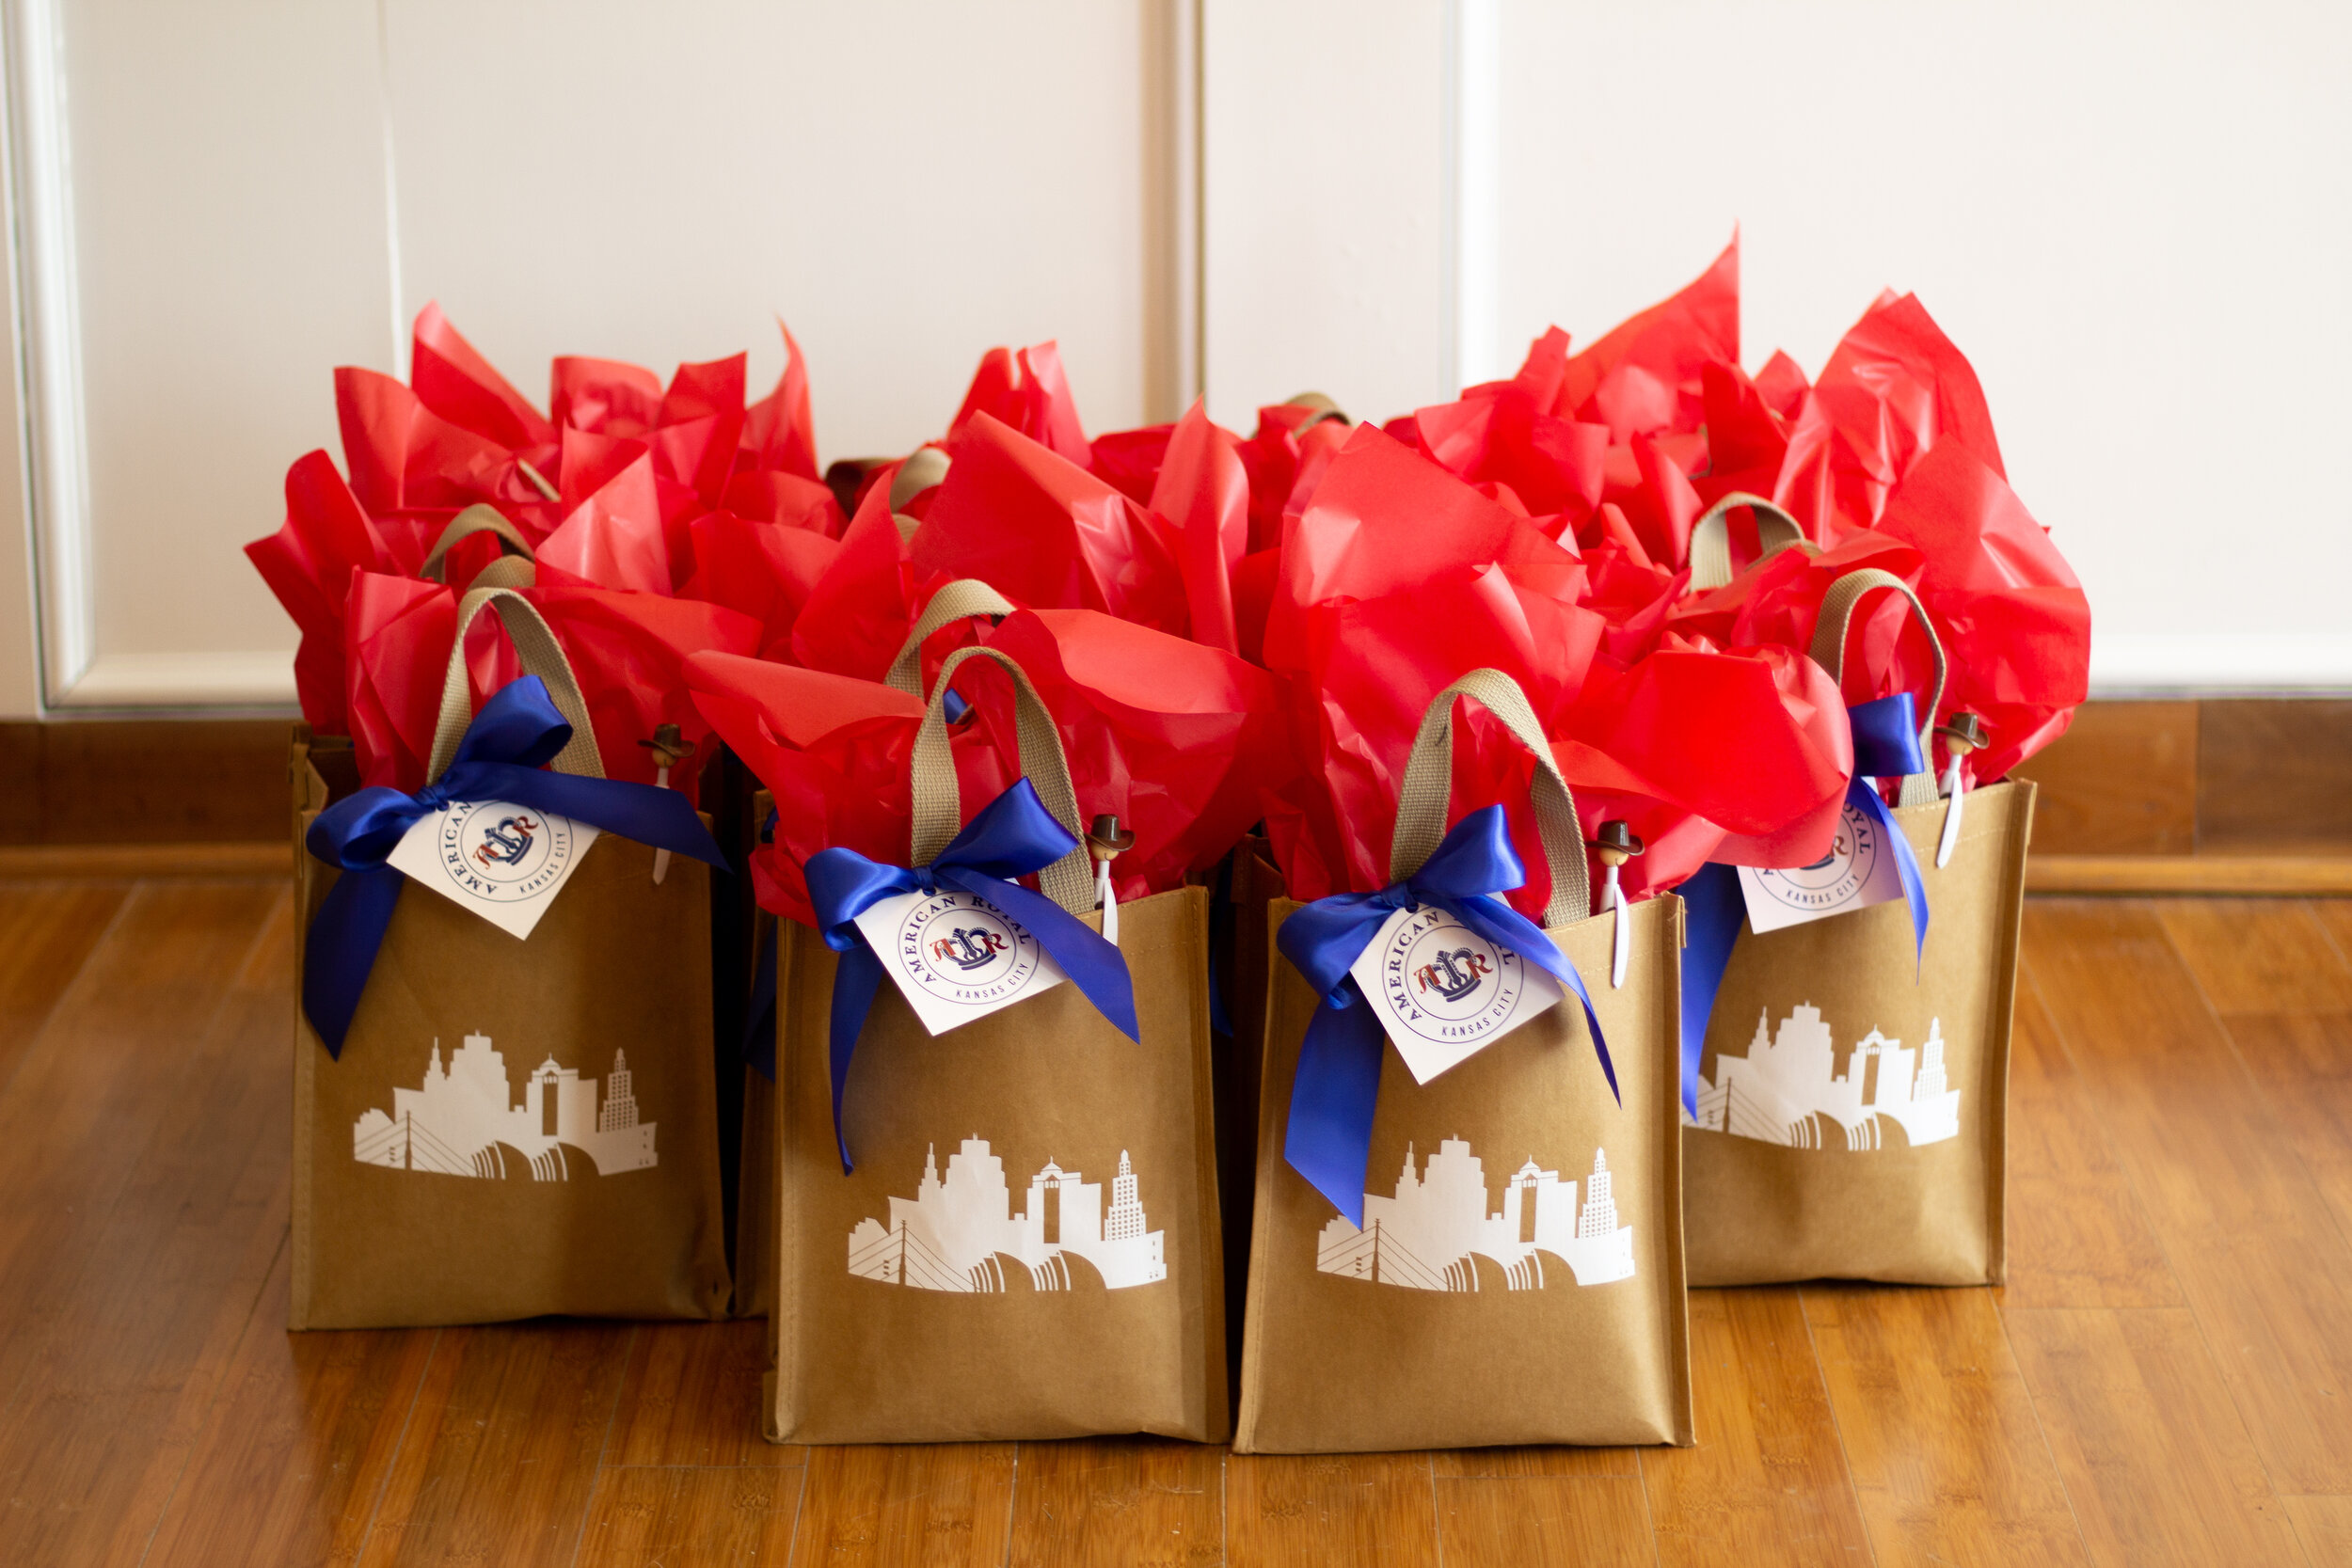 15 DIY Swag Bag Ideas for Clients, Events, and Giveaways - Avery